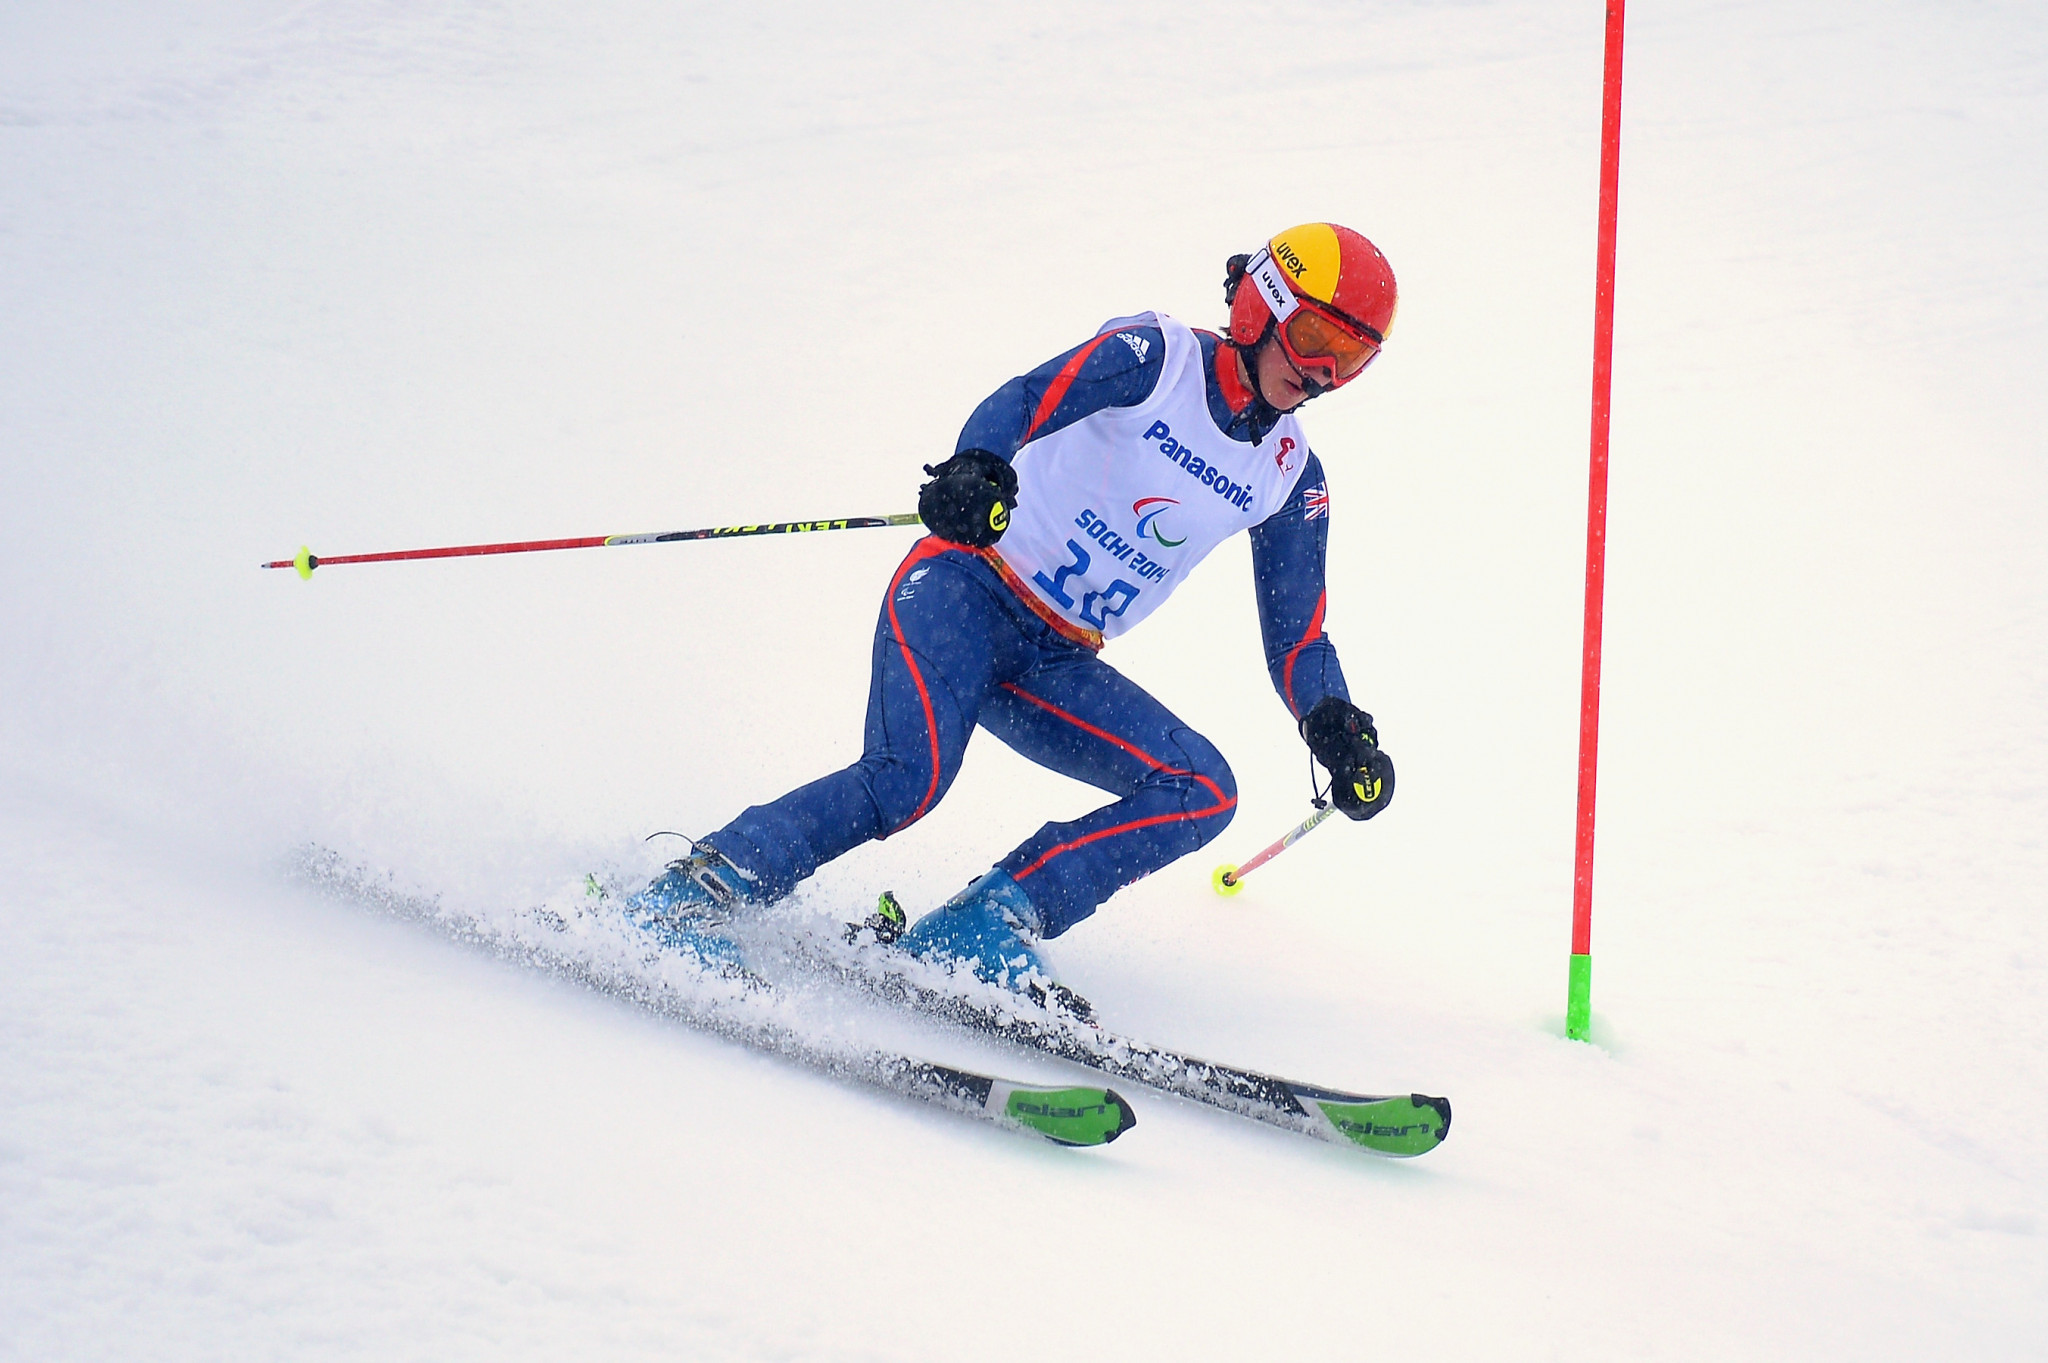 Britain's Millie Knight made her Paralympic debut at Sochi 2014 ©Getty Images